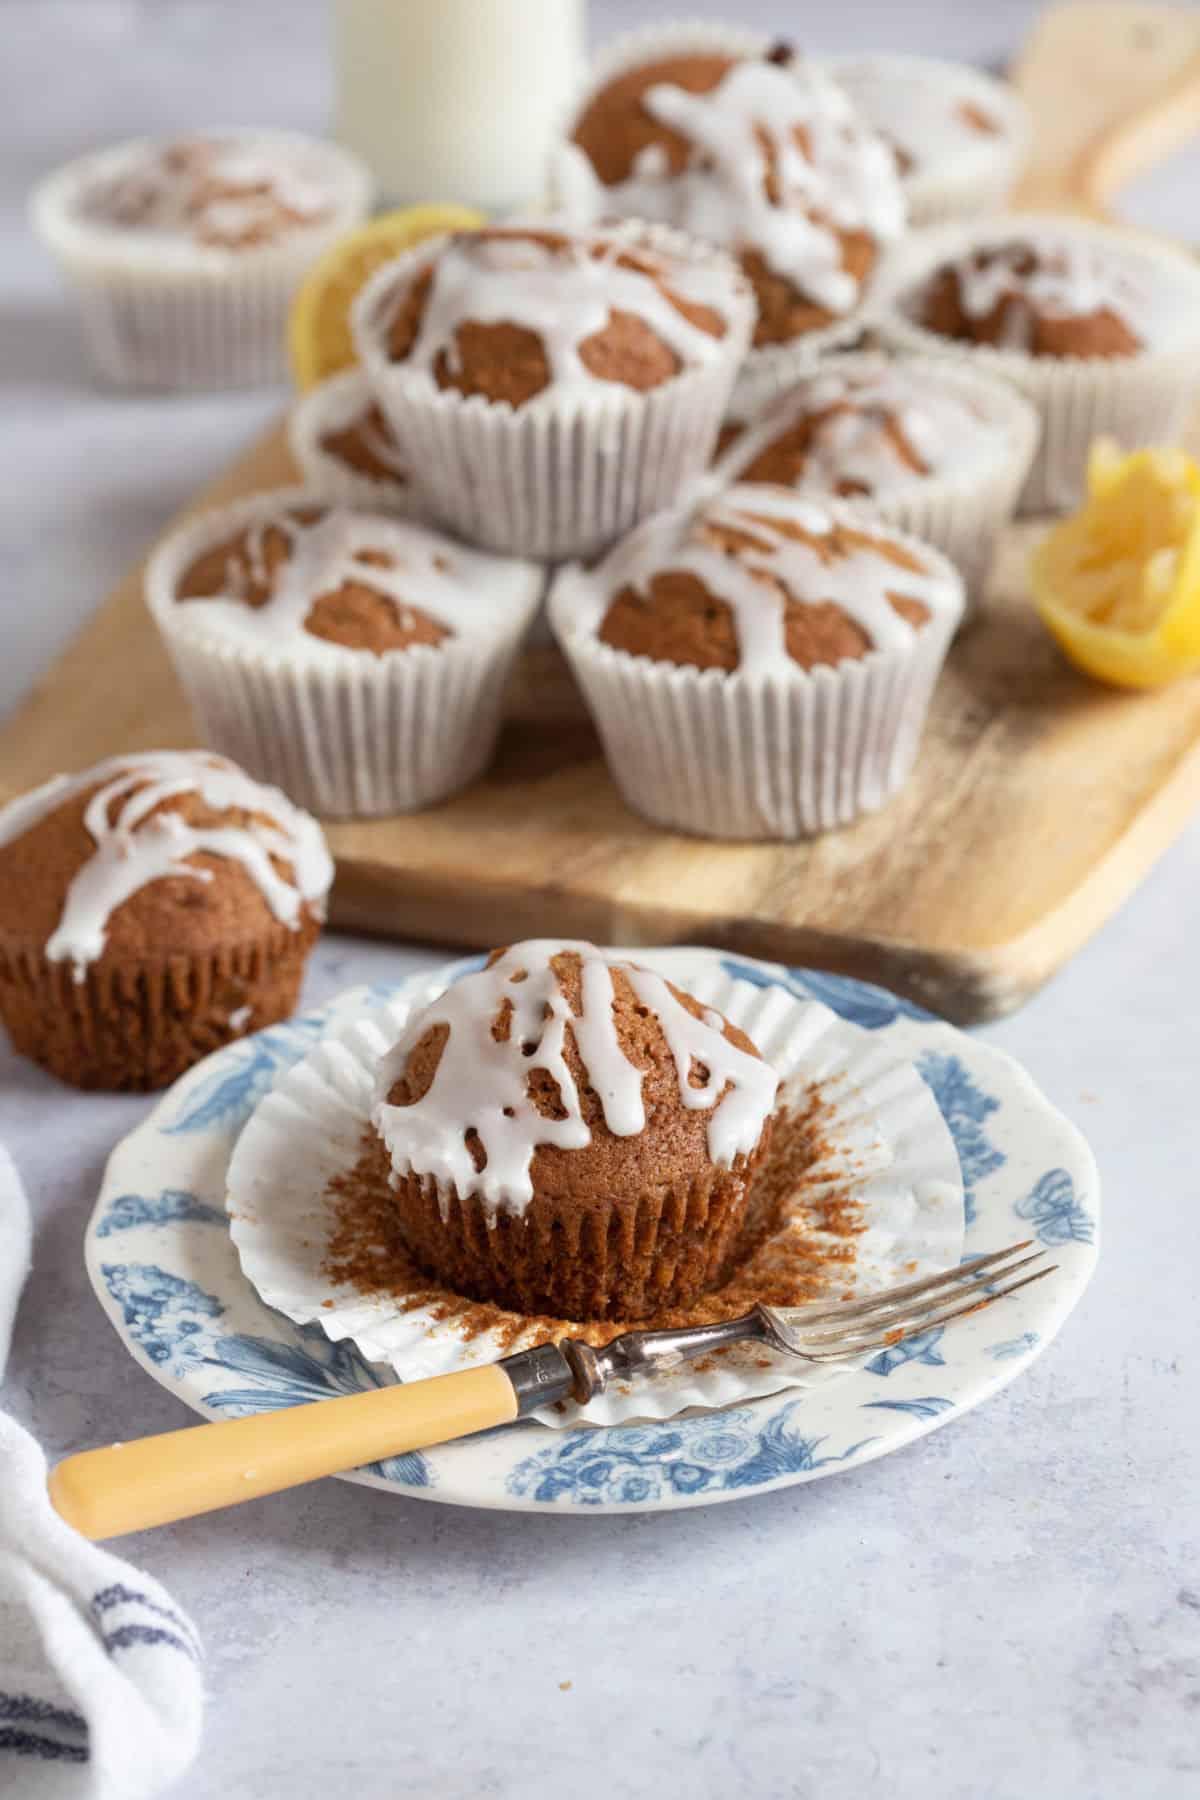 A gingerbread muffin on a plate with gingerbread muffins in the background.